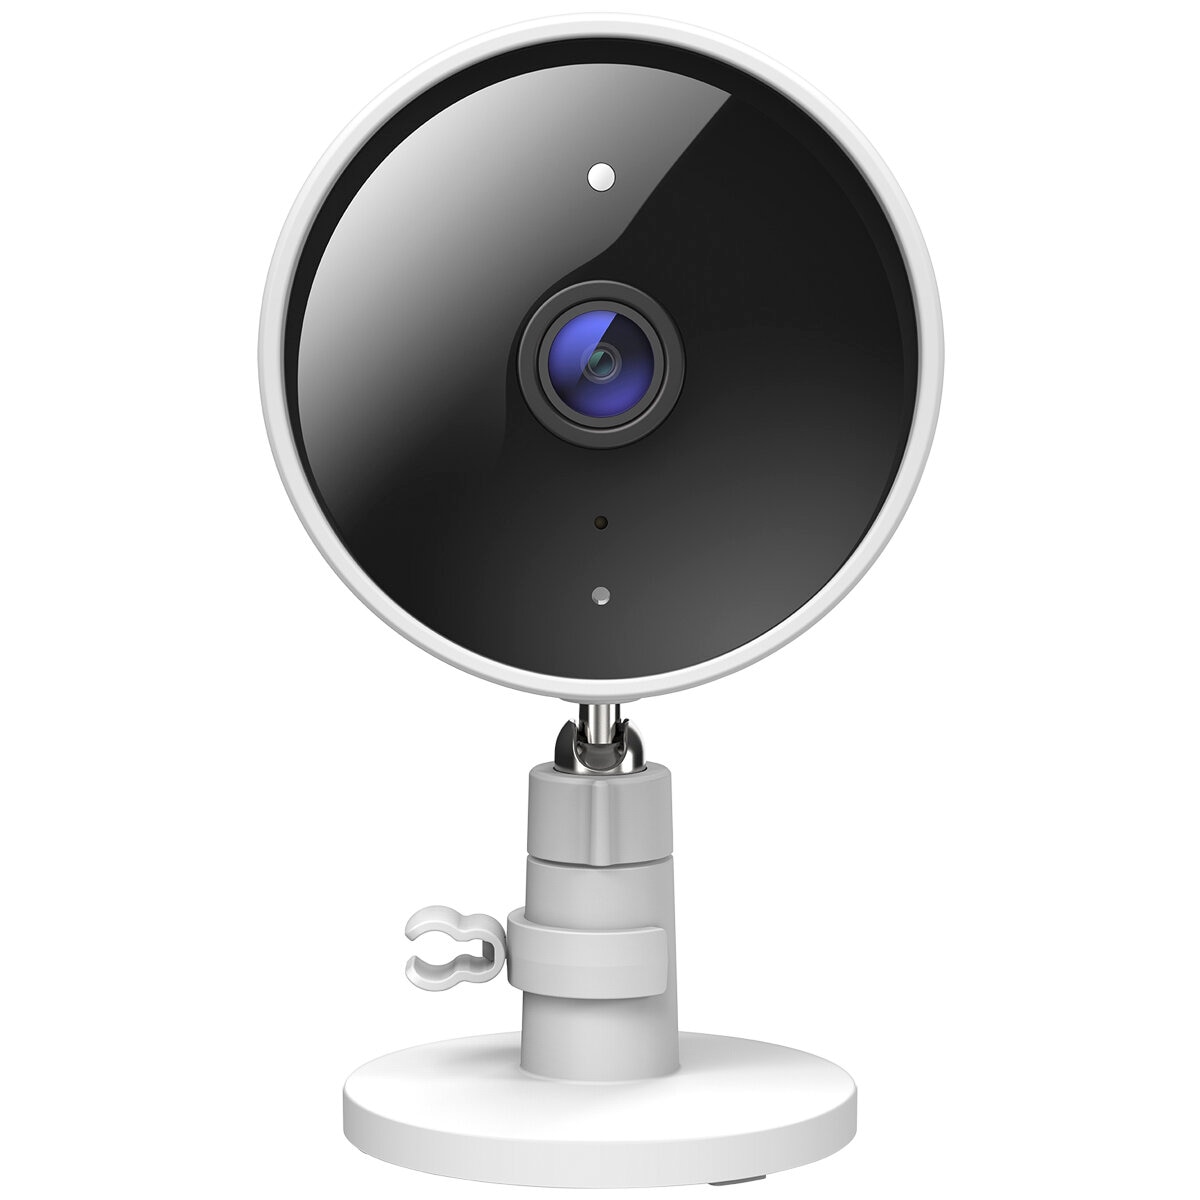 D-Link Full HD Weather Resistant Pro Wi-Fi Camera DCS-8302LH